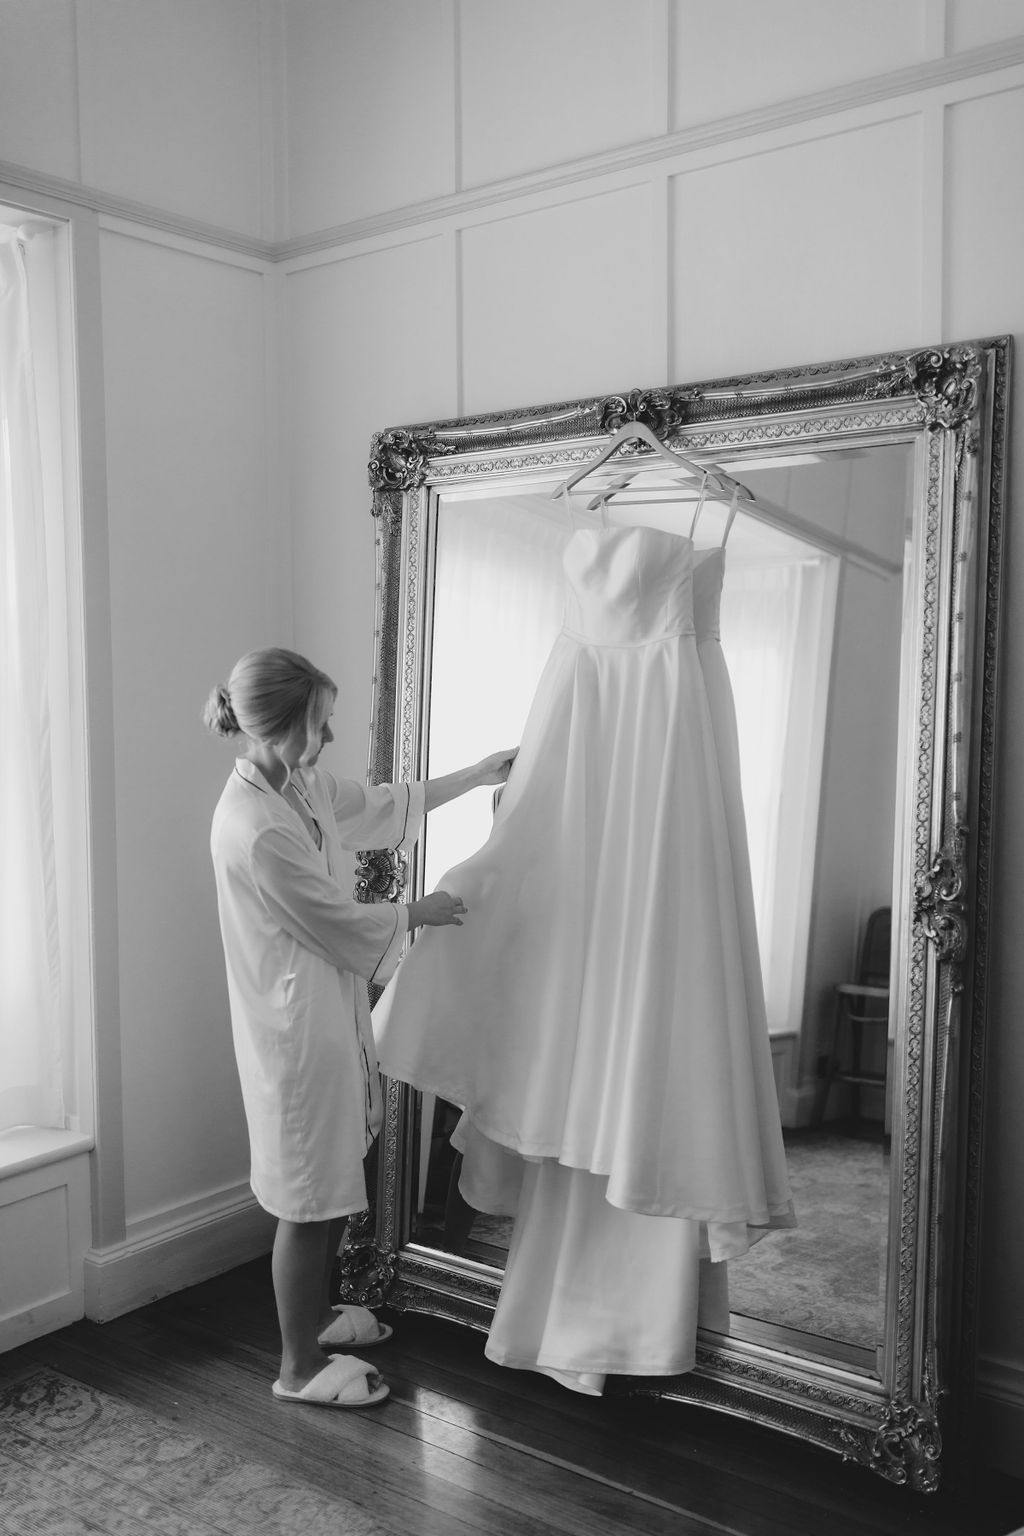 A woman dressed in a robe and slippers stands in a room, adjusting a long, white wedding dress hanging on a hanger in front of a large, ornate mirror. The room has wooden floors and is softly lit by natural light coming through a window. (Black and white image).